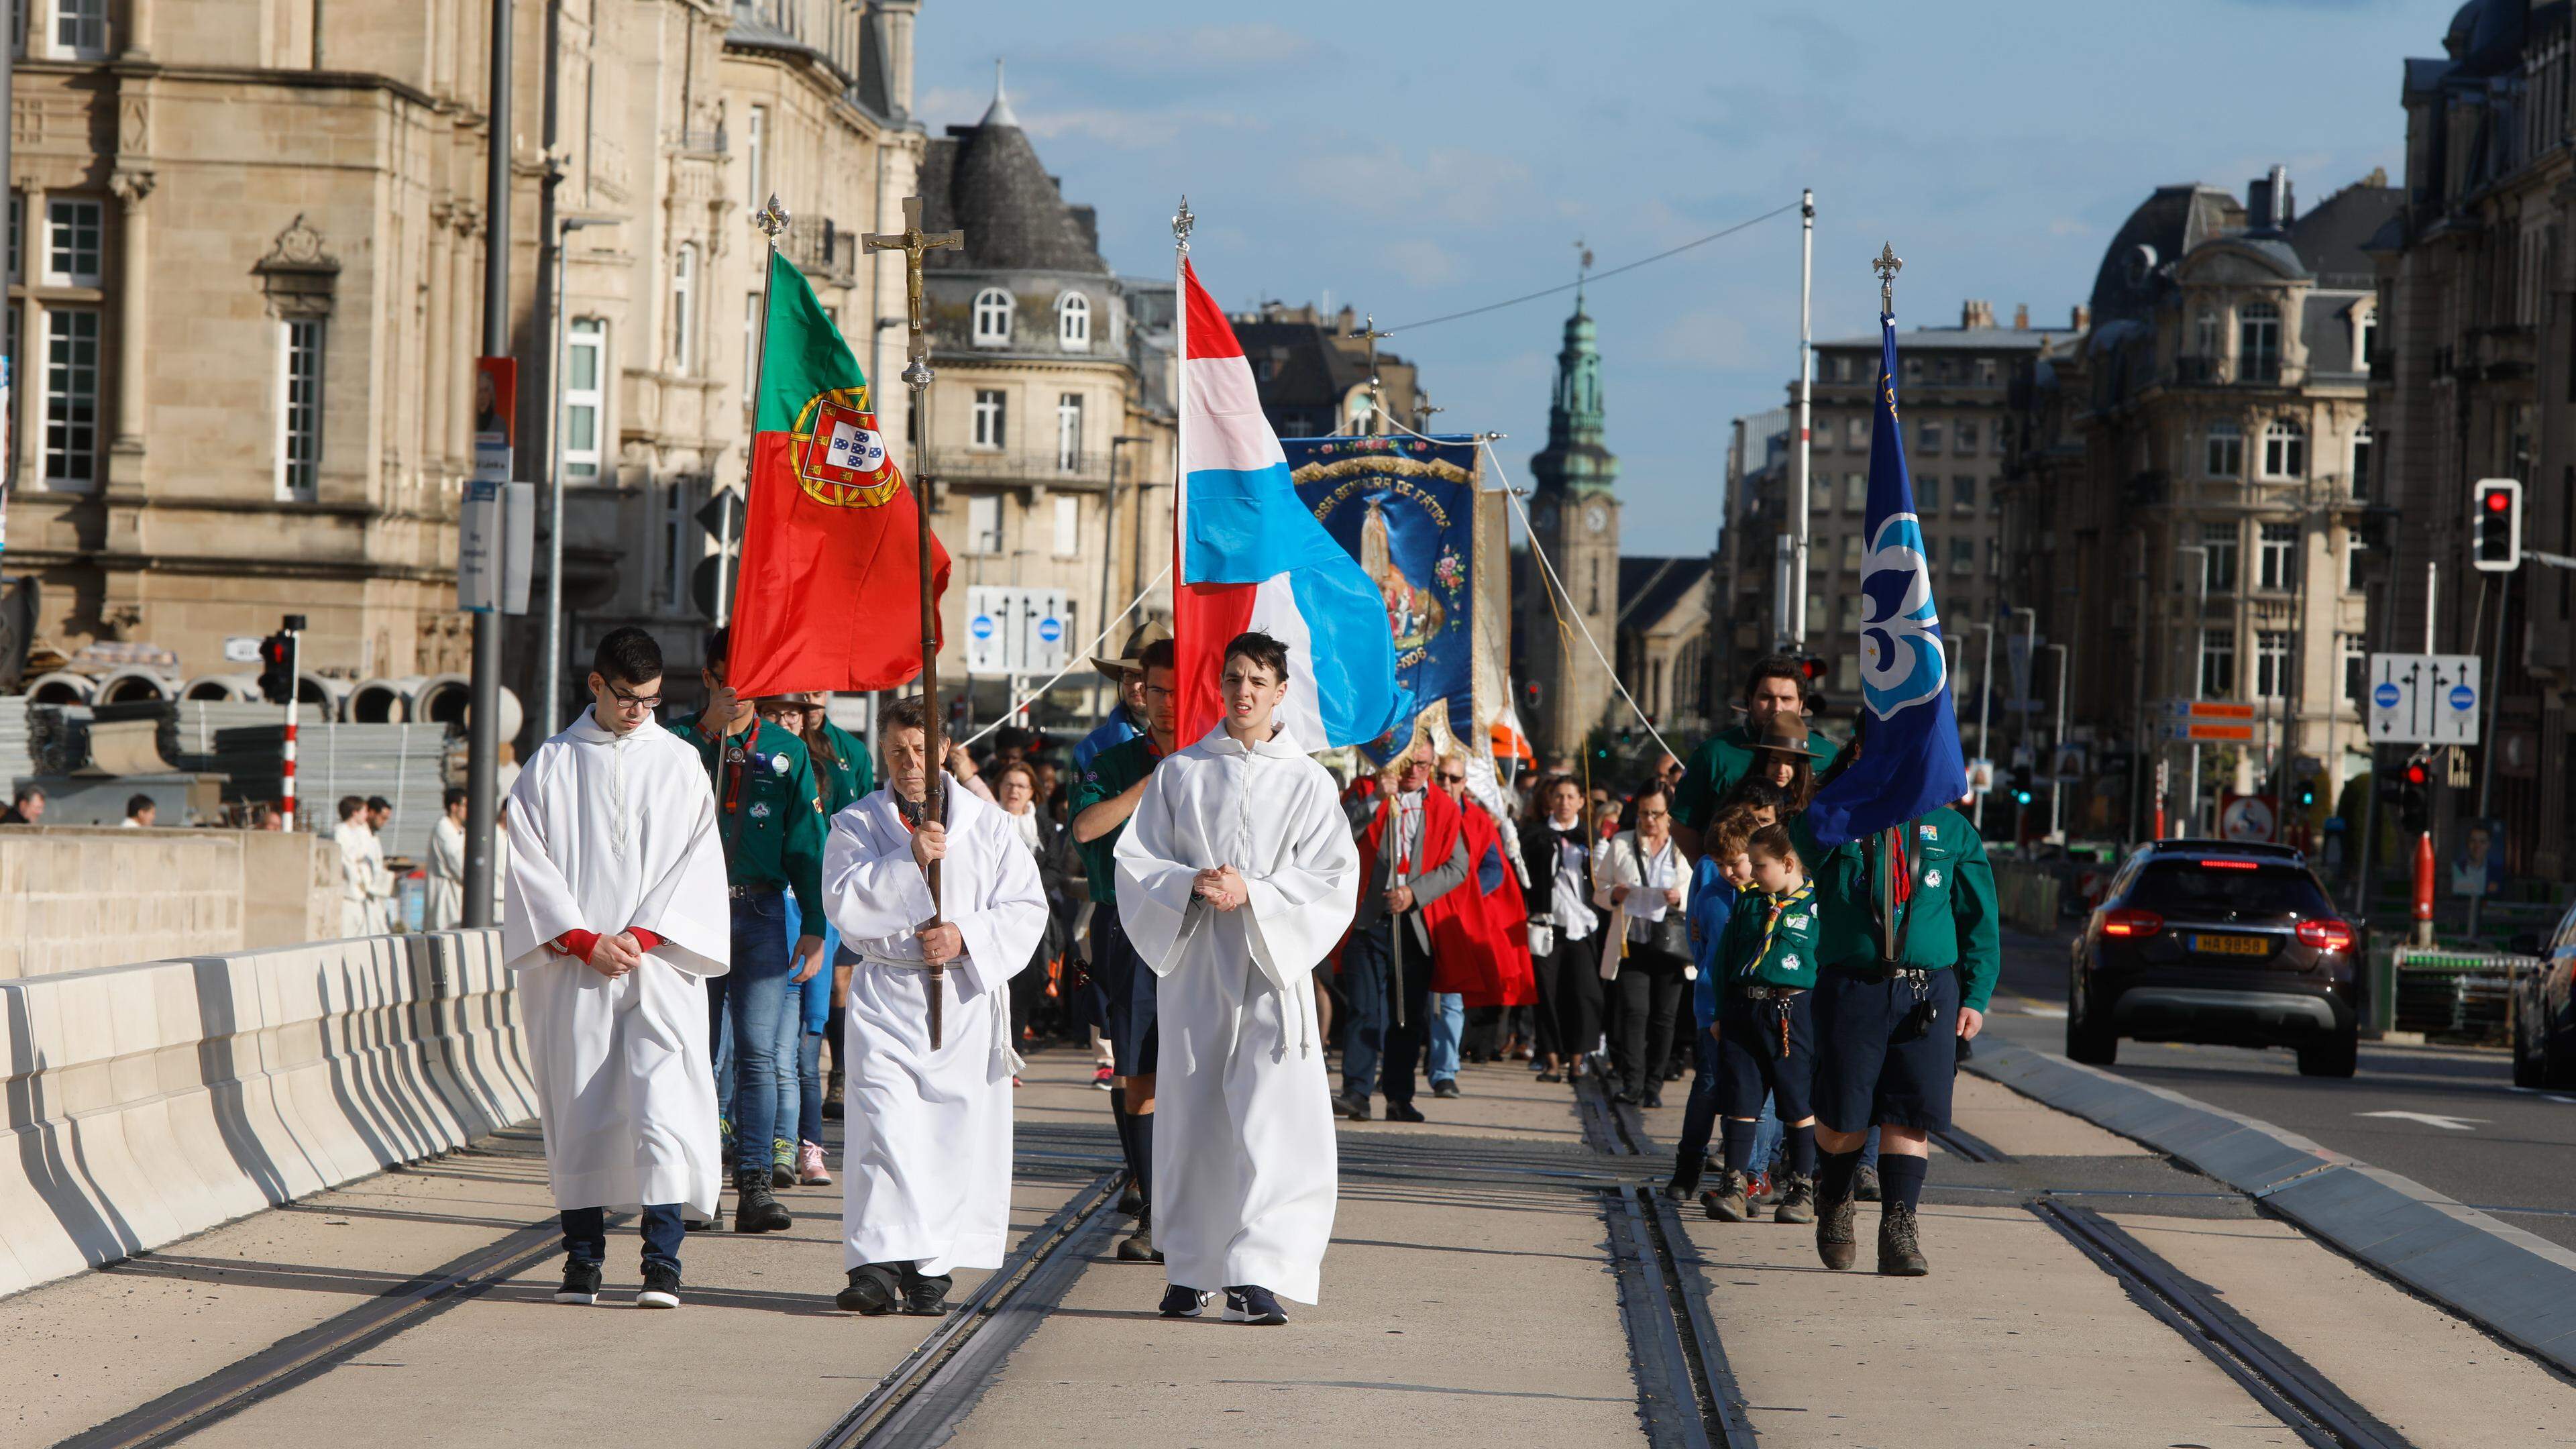 Believers take part in the procession in Luxembourg City, Luxembourg, April 2019.